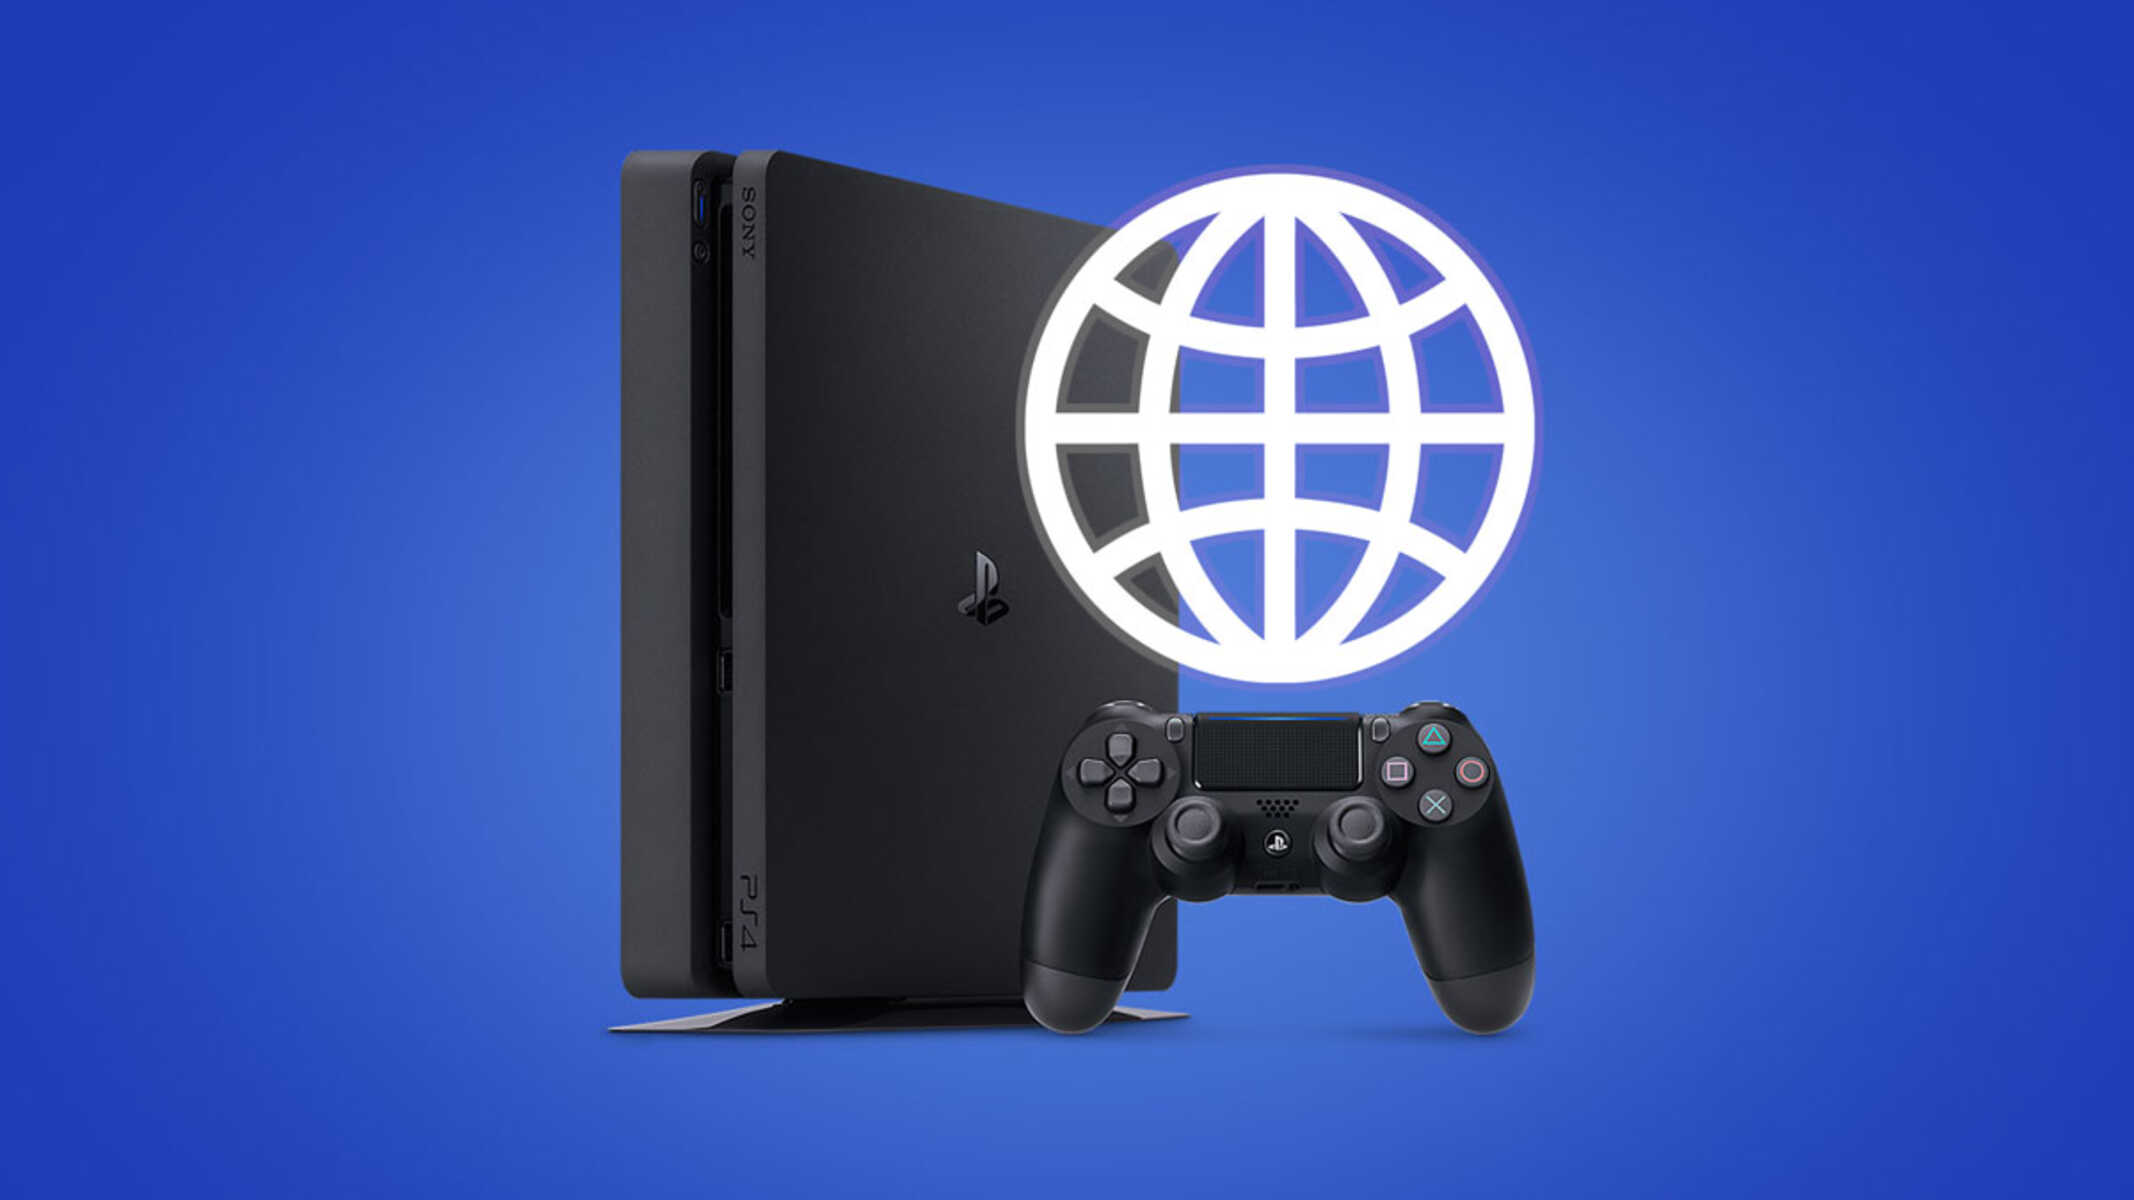 How To Access The Internet Browser On PS4